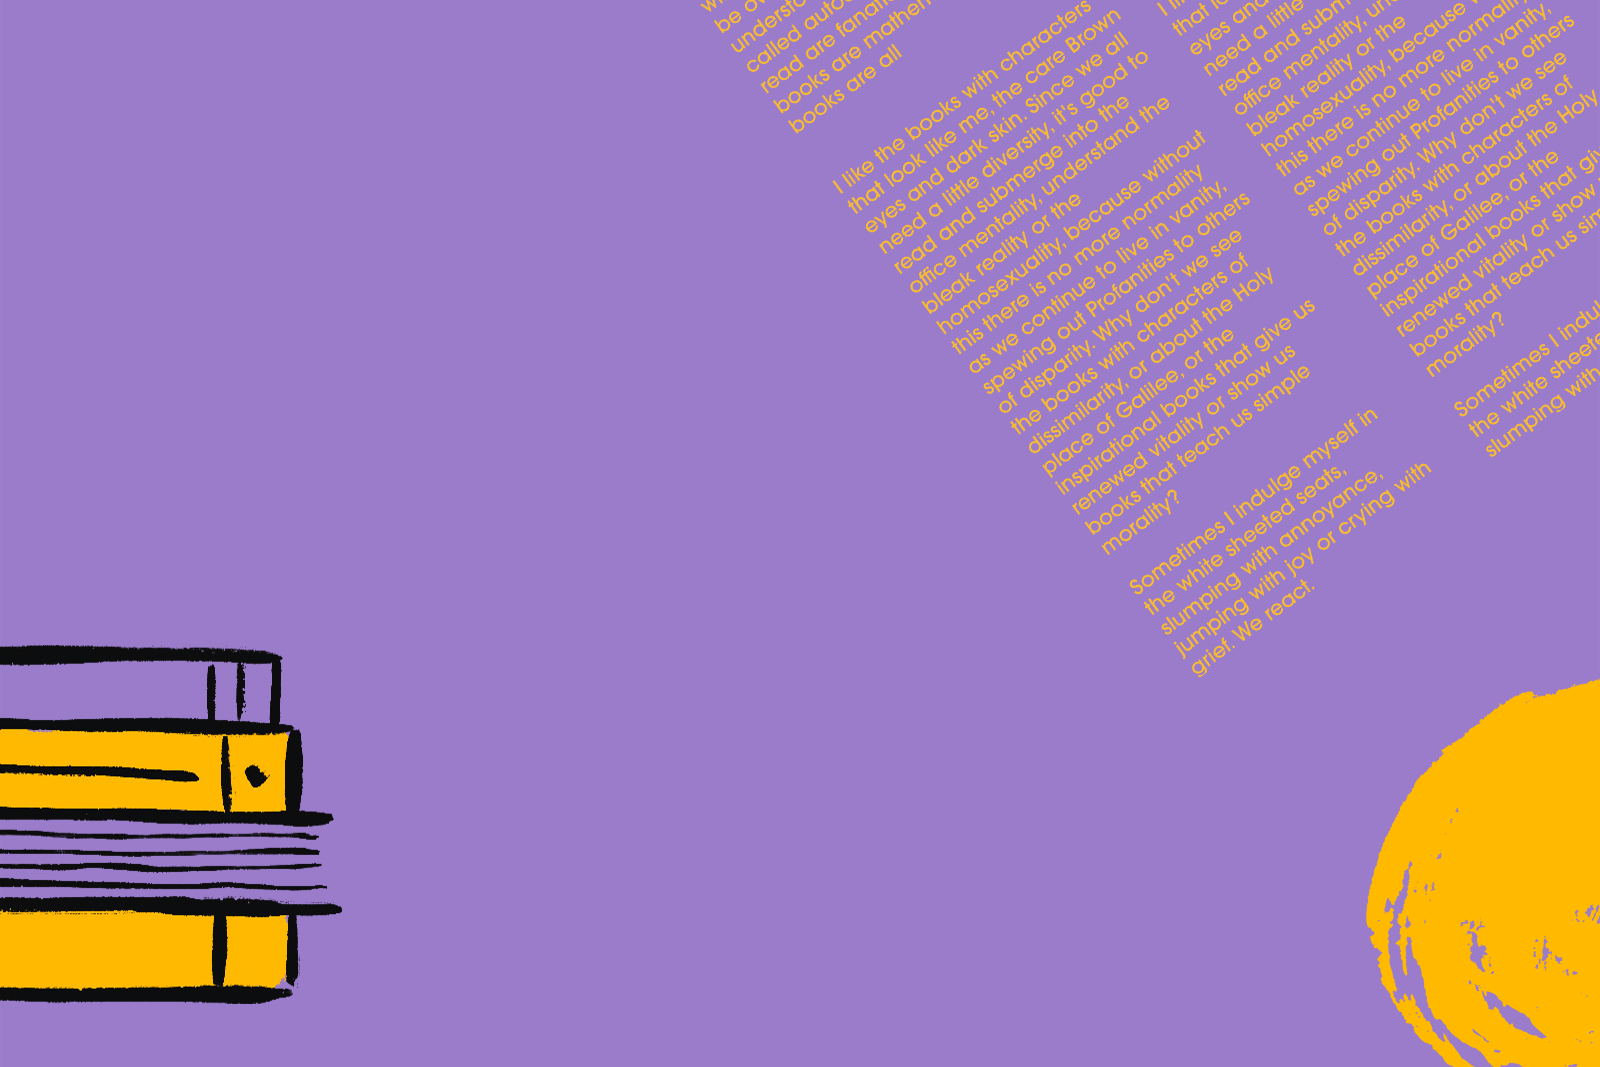 A line illustration showing a stack of books off to the left hand corner. The background is purple and some of the books are highlighted in bright yellow.